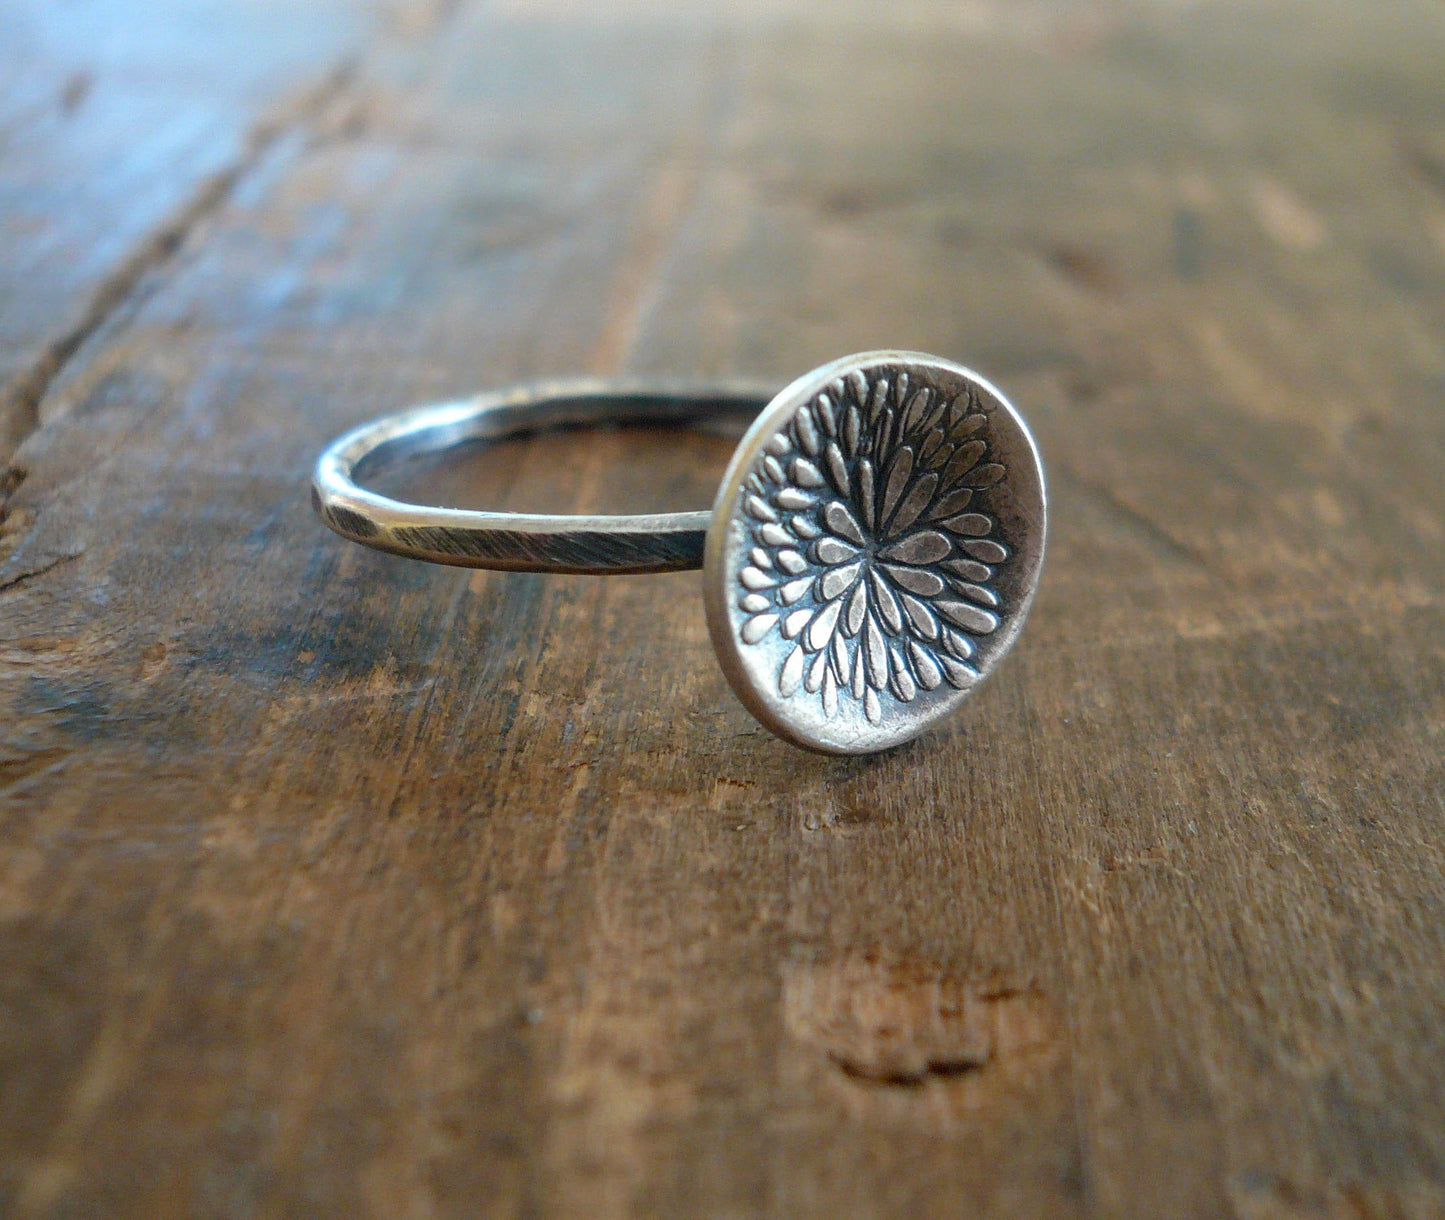 Bloom Ring - Sterling & Fine Silver Oxidized Hammered Ring. Hand made by jNic Designs